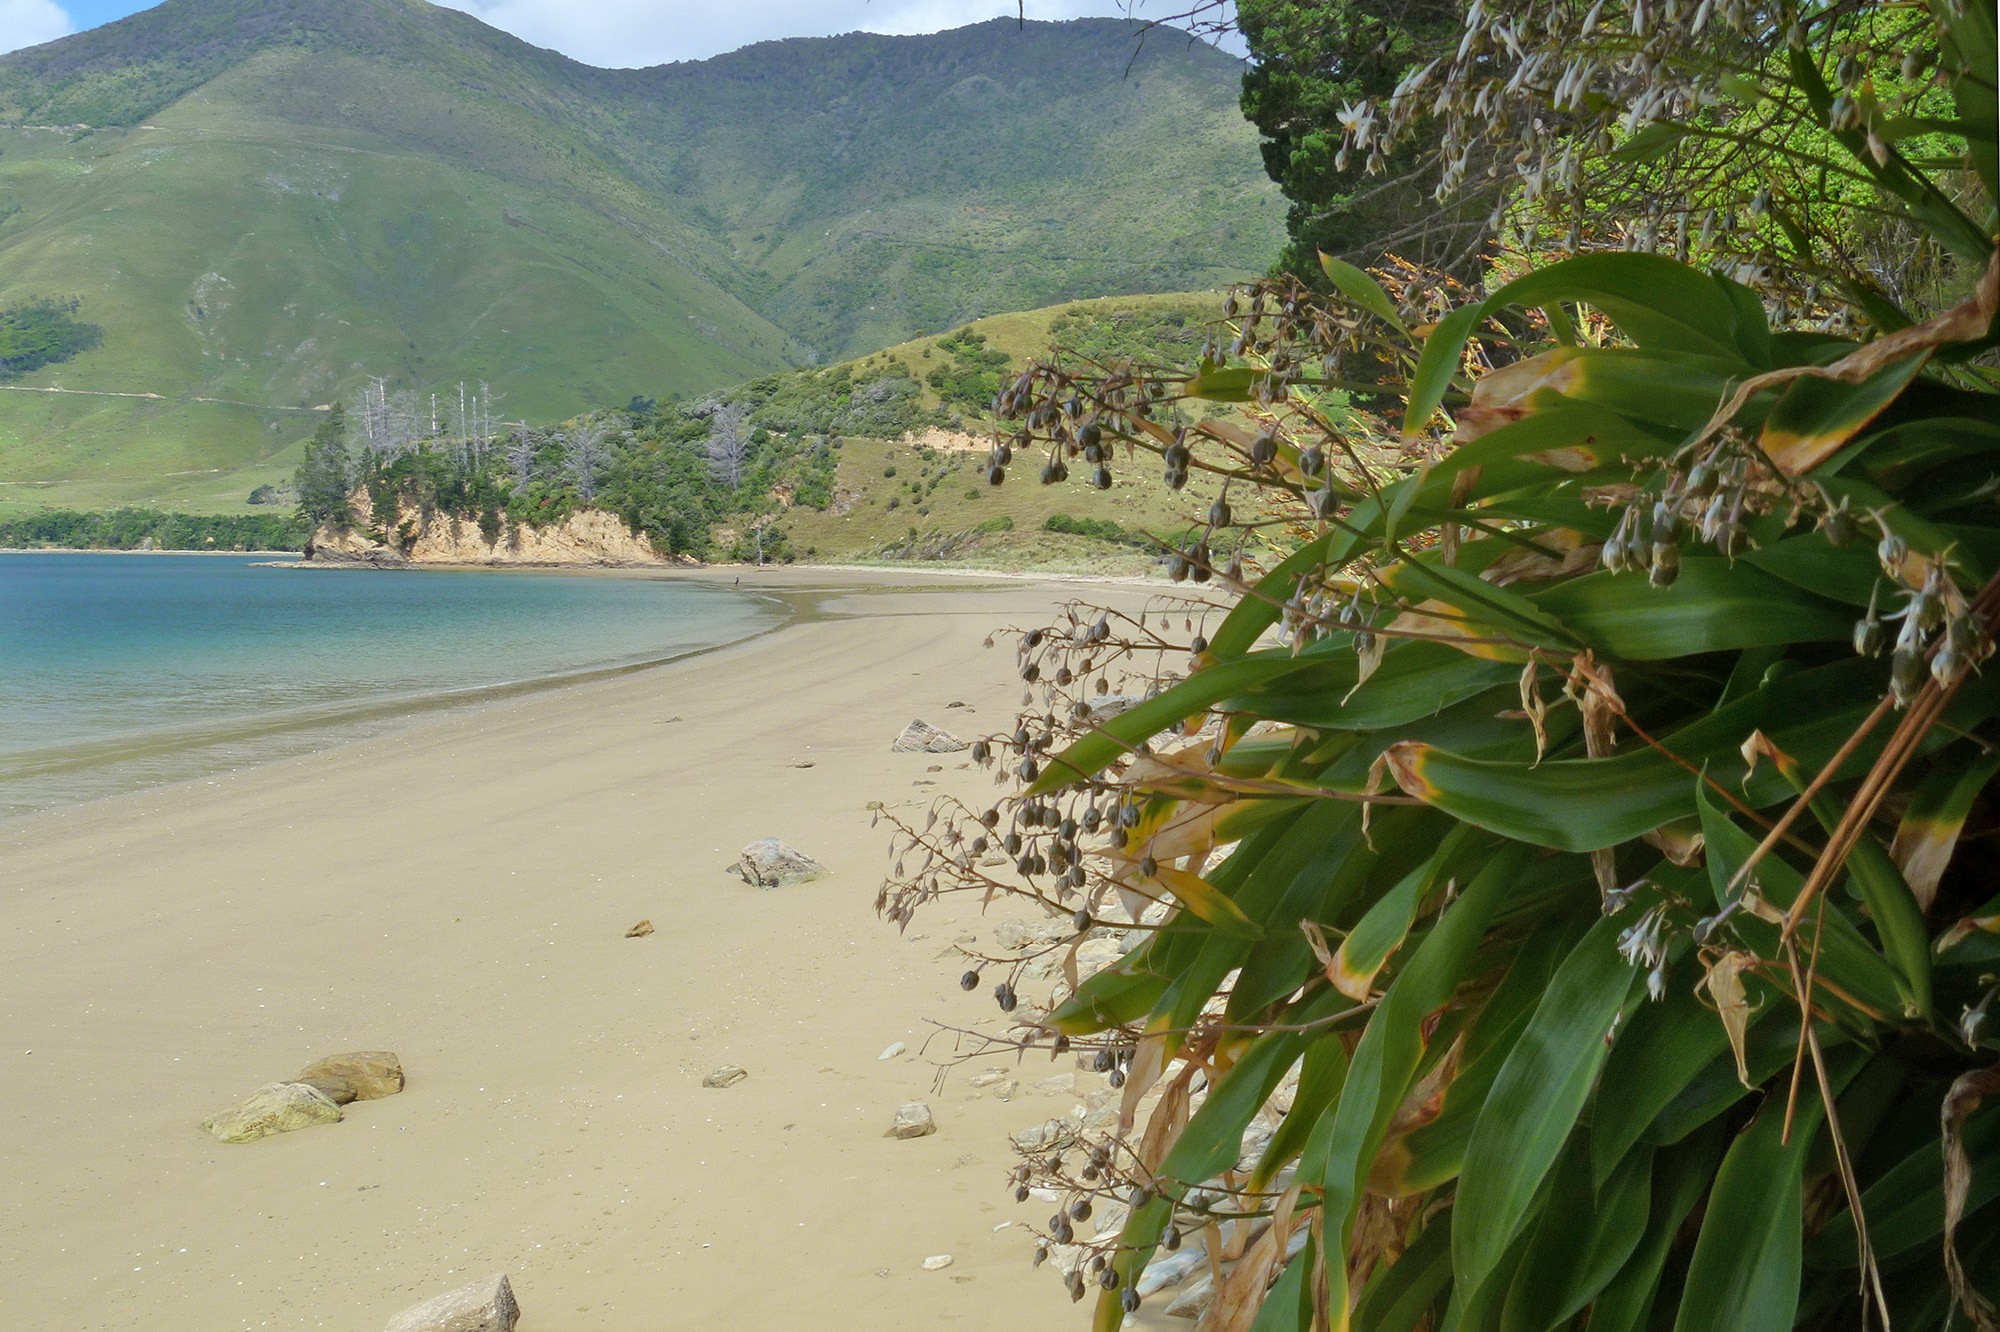 A beach with a flowering plant in the foreground